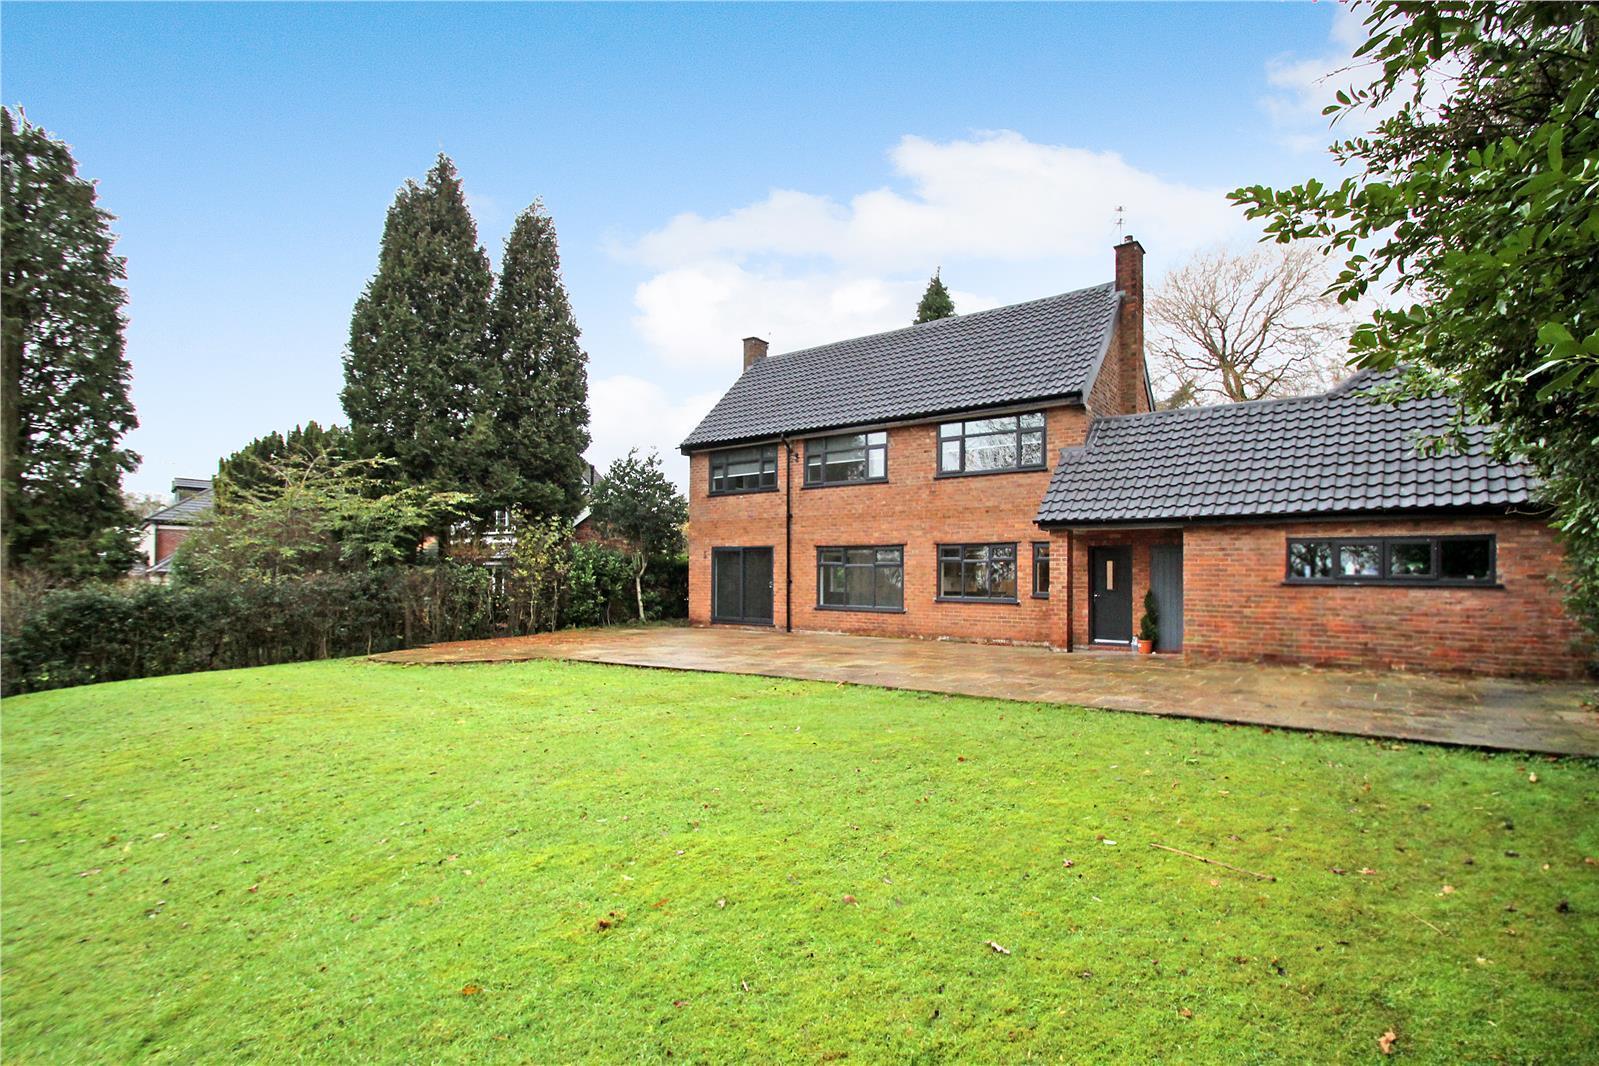 4 bed detached house to rent in Carrwood, Hale Barns  - Property Image 2